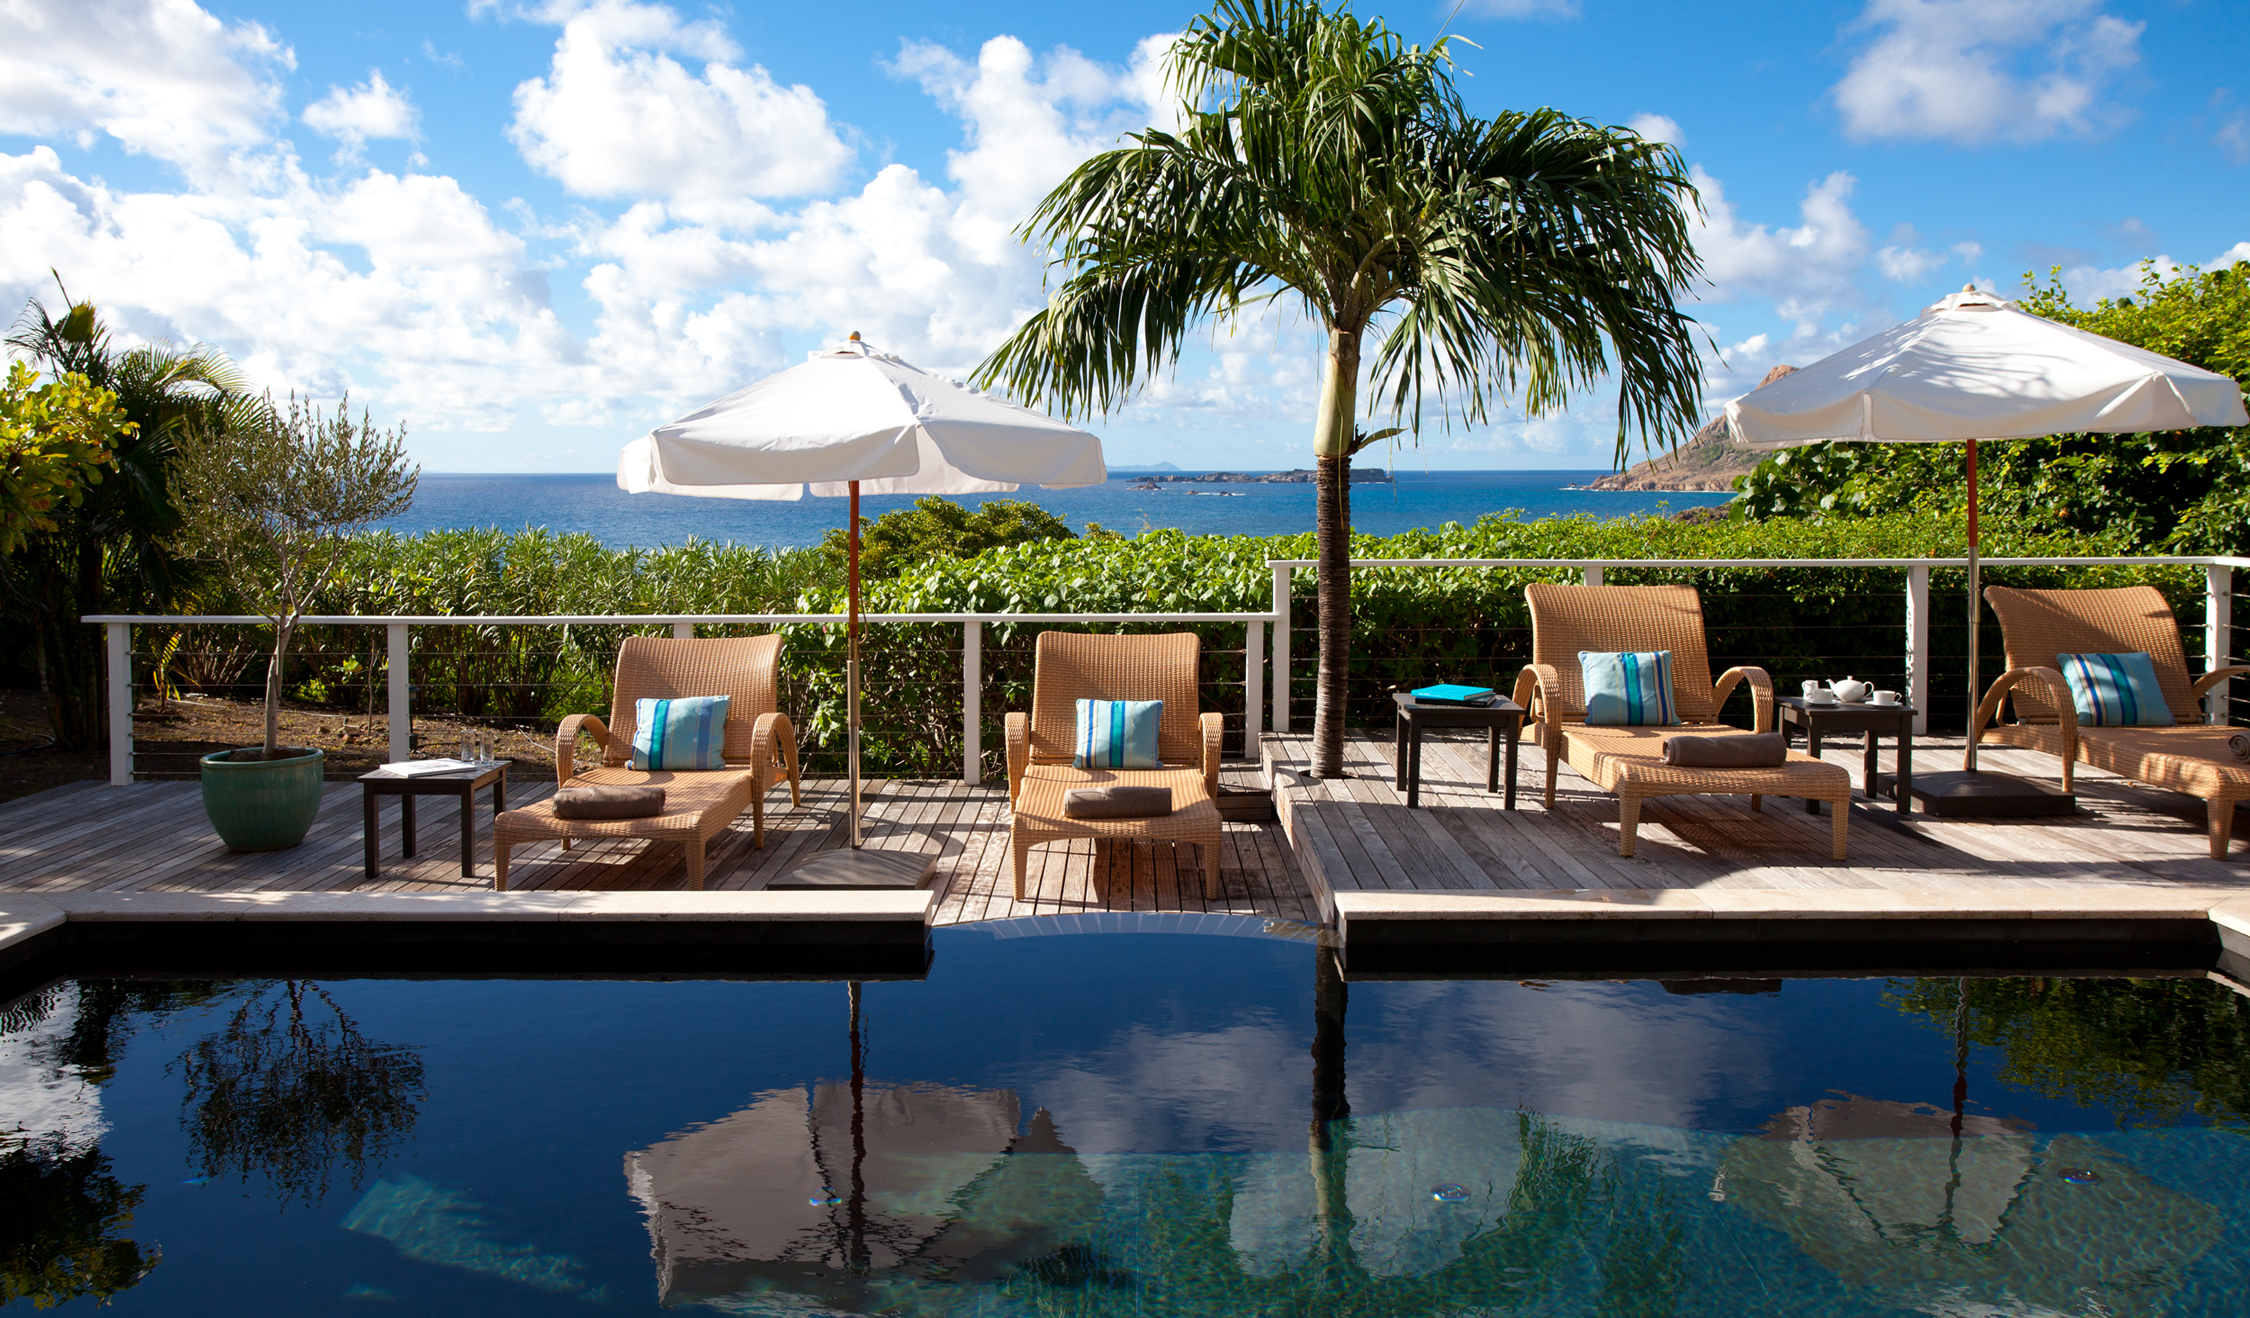 Hotel Le Toiny St Barth on the French Caribbean island of St Barthelemy